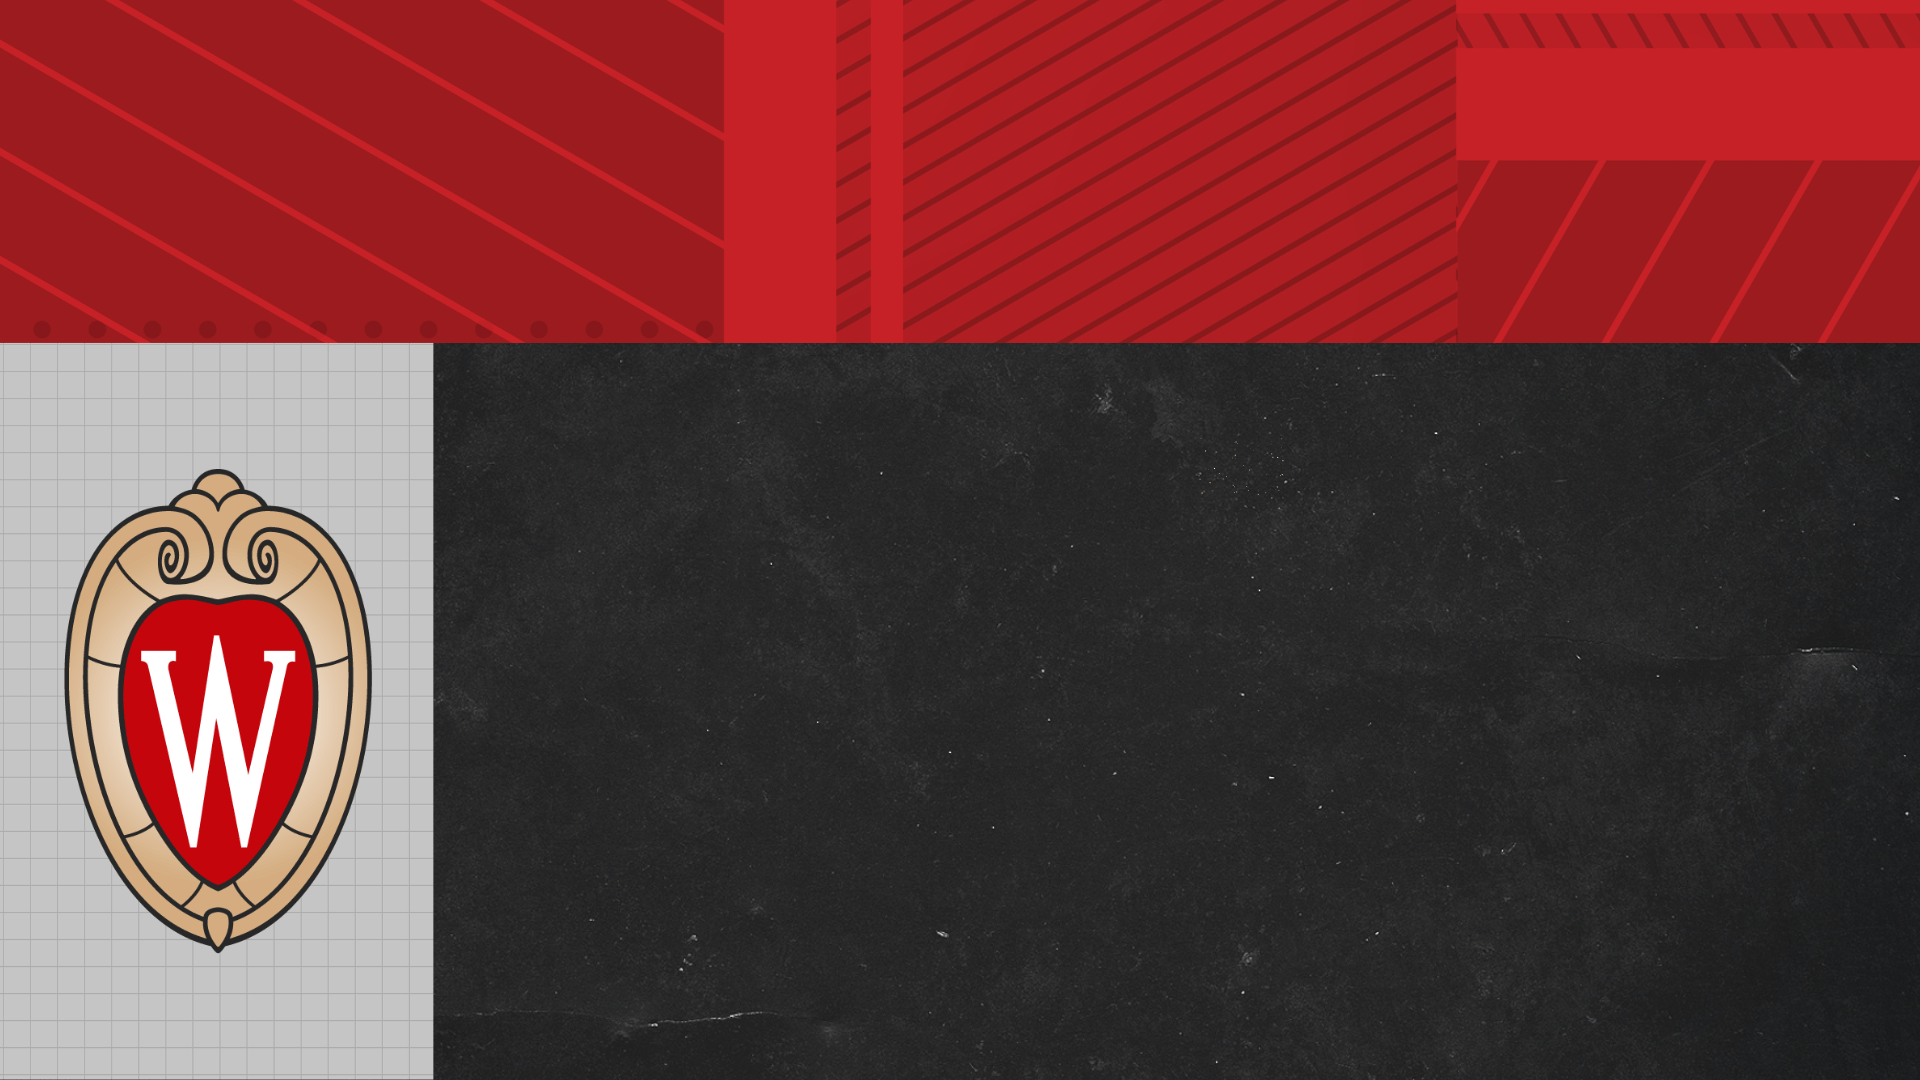 Graphic with red, black, and gray rectangles and W crest